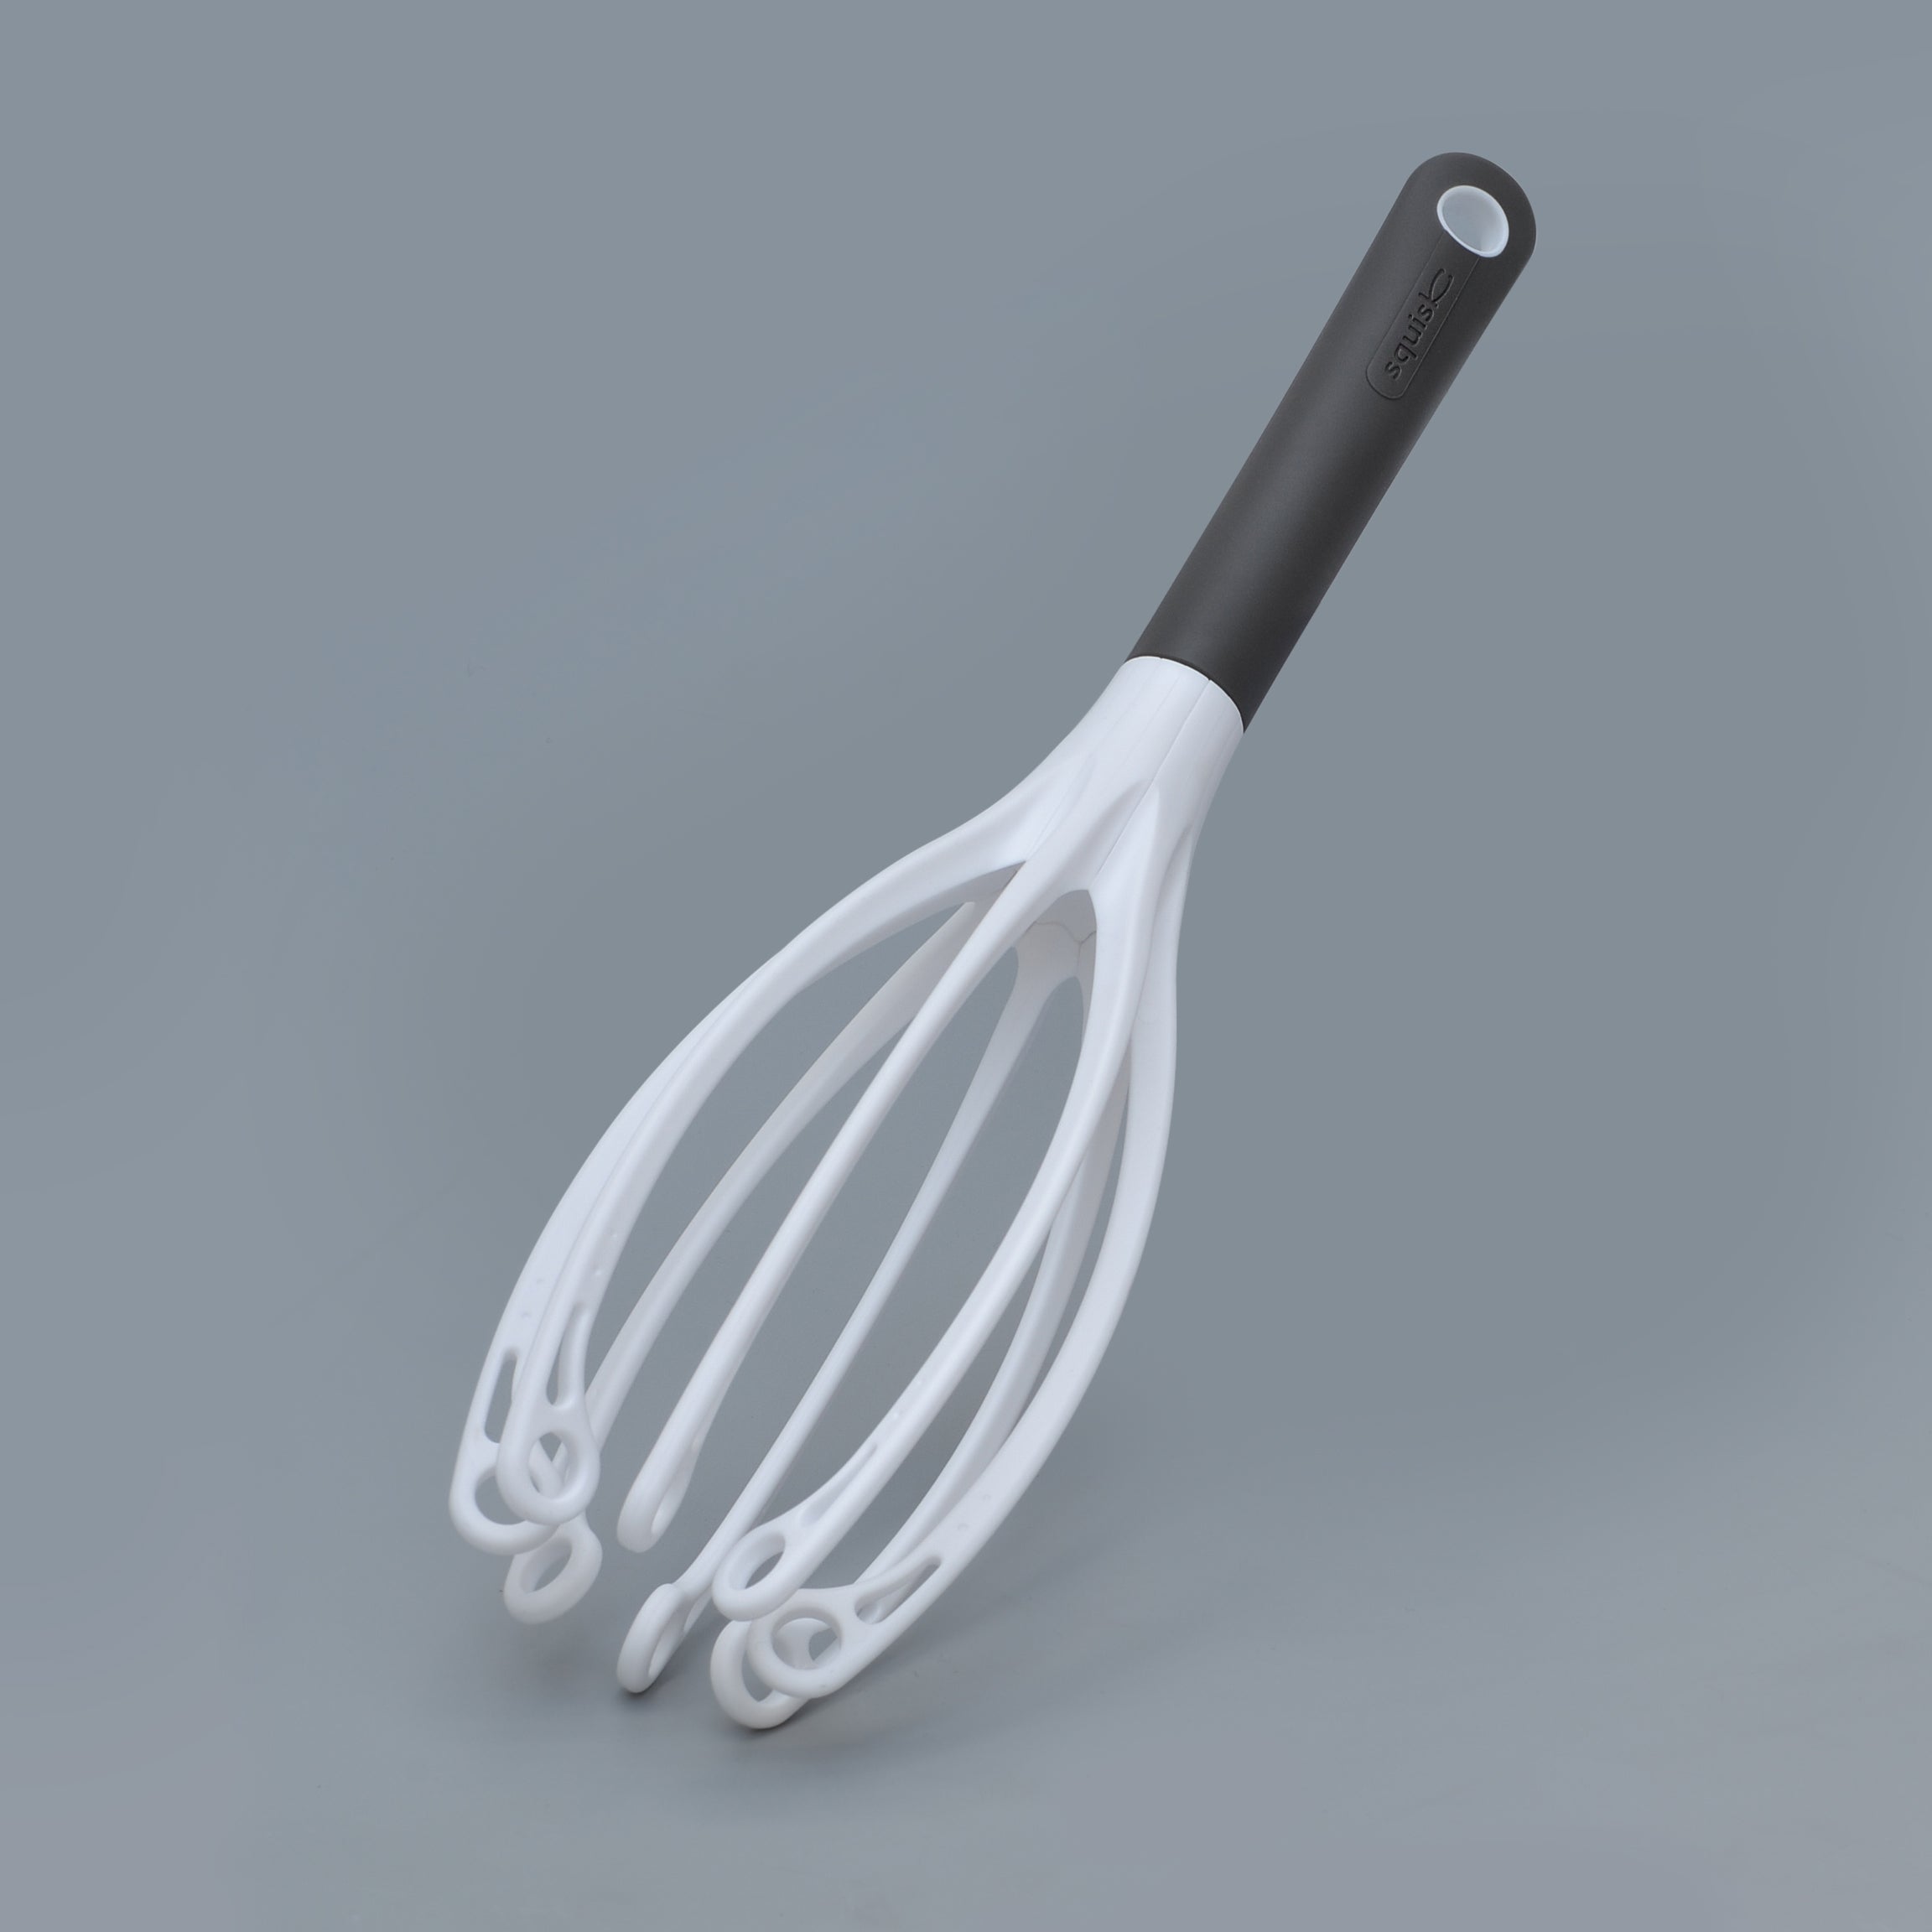 Squisk - Innovative Whisk - Innovative and Exciting Kitchen Utensils by  Üutensil